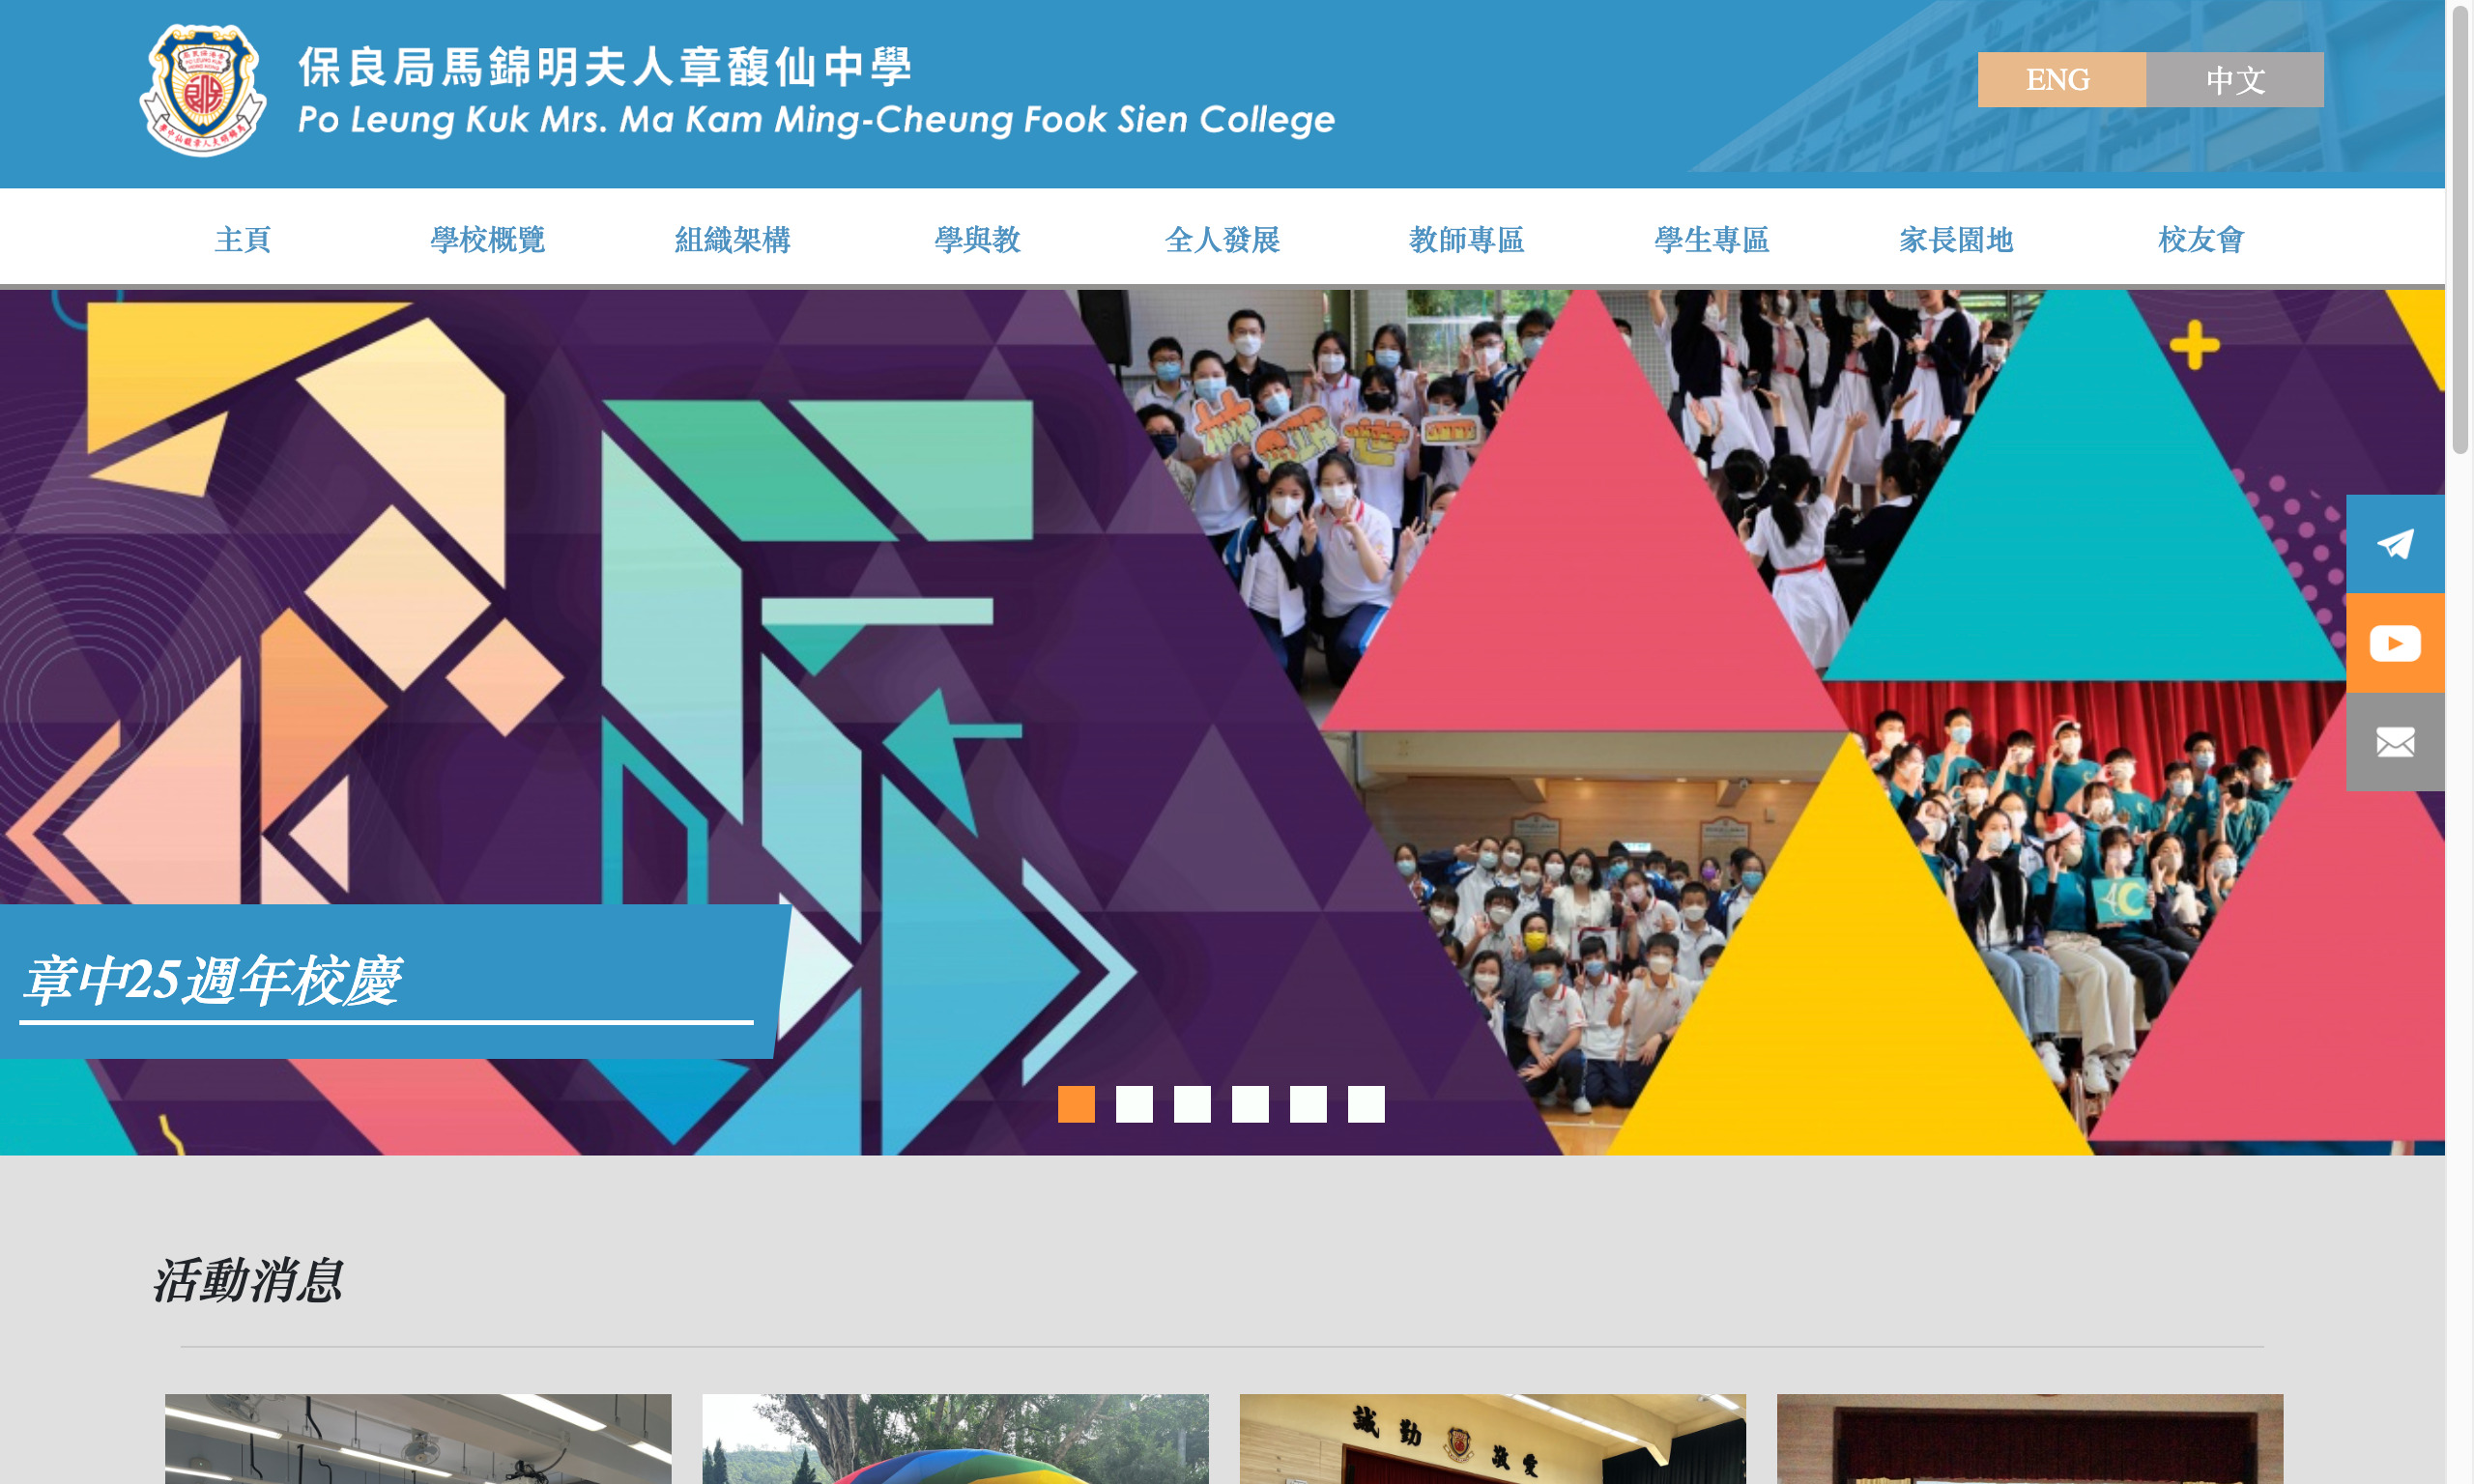 Screenshot of the Home Page of PLK Mrs. Ma Kam Ming-Cheung Fook Sien College